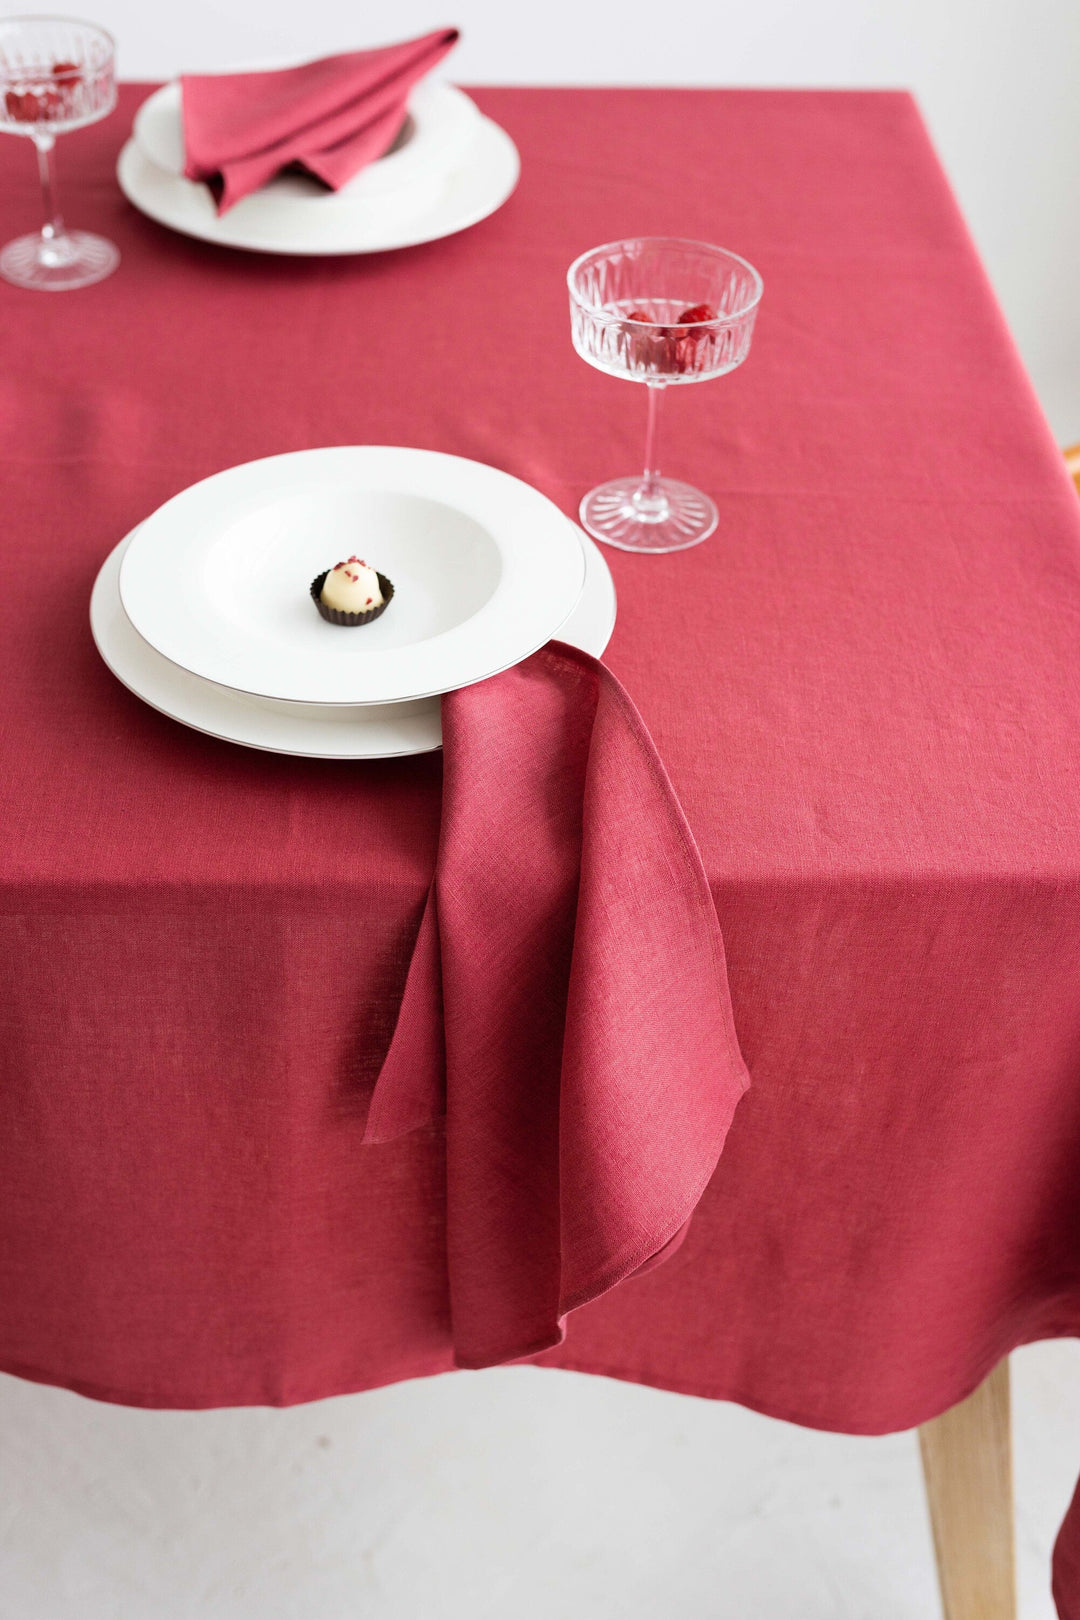 Linen Tablecloth In Raspberry Color Decorated On Table 5 - Daily Linen